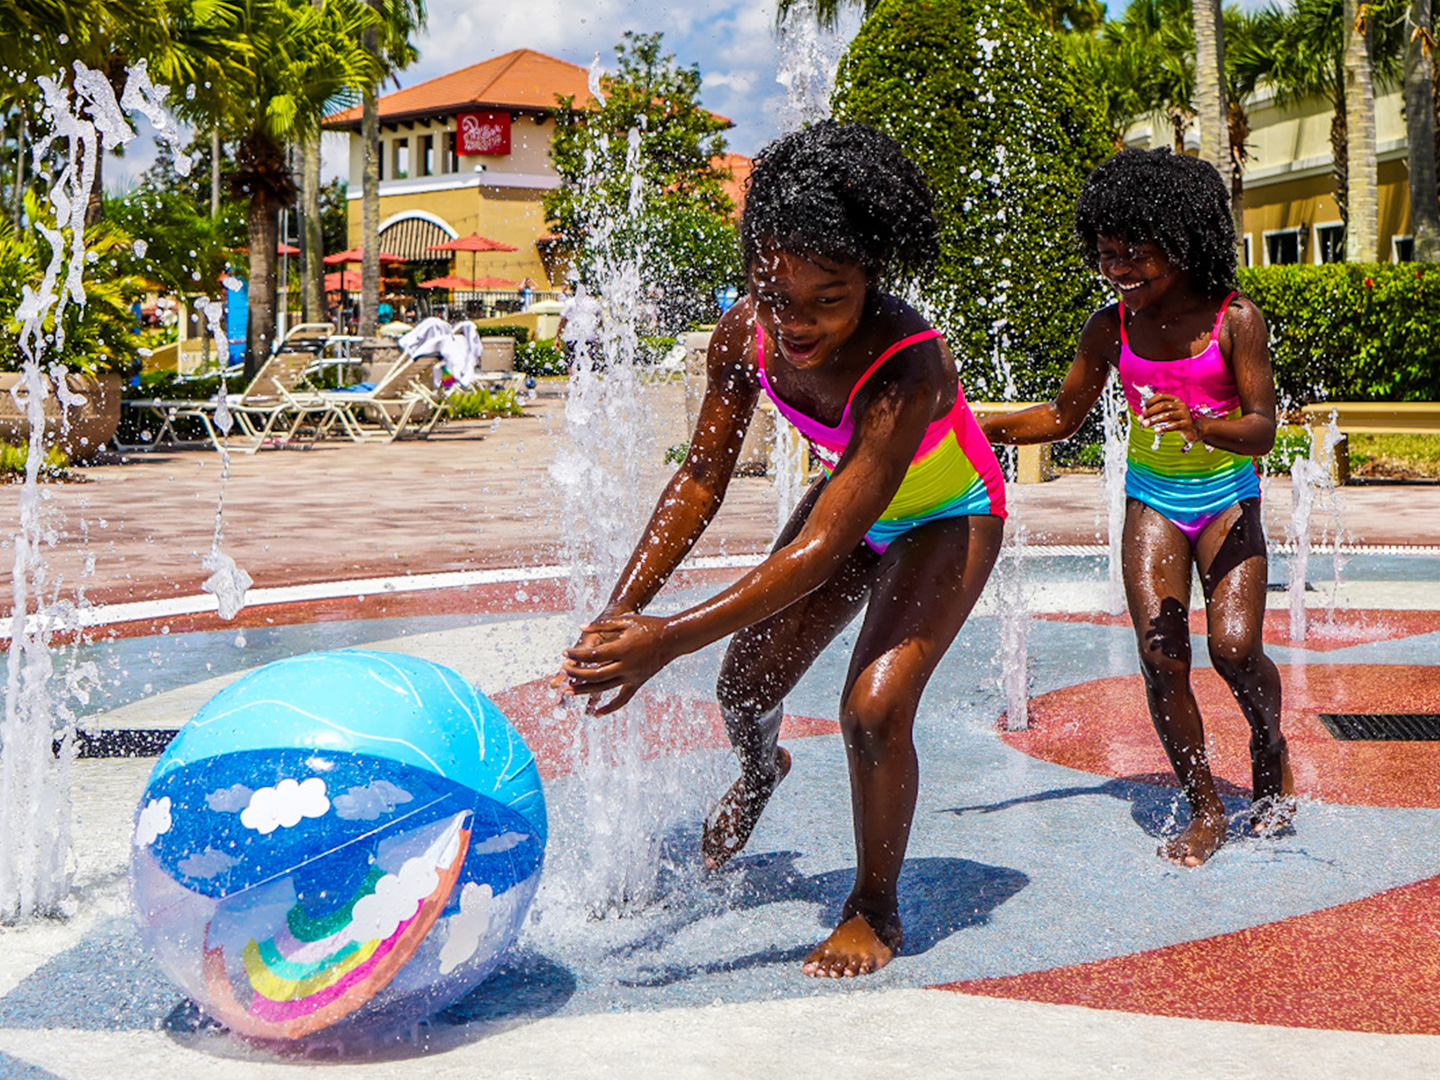 Things to Do in Orlando When it Rains - Splashing Fun for All •